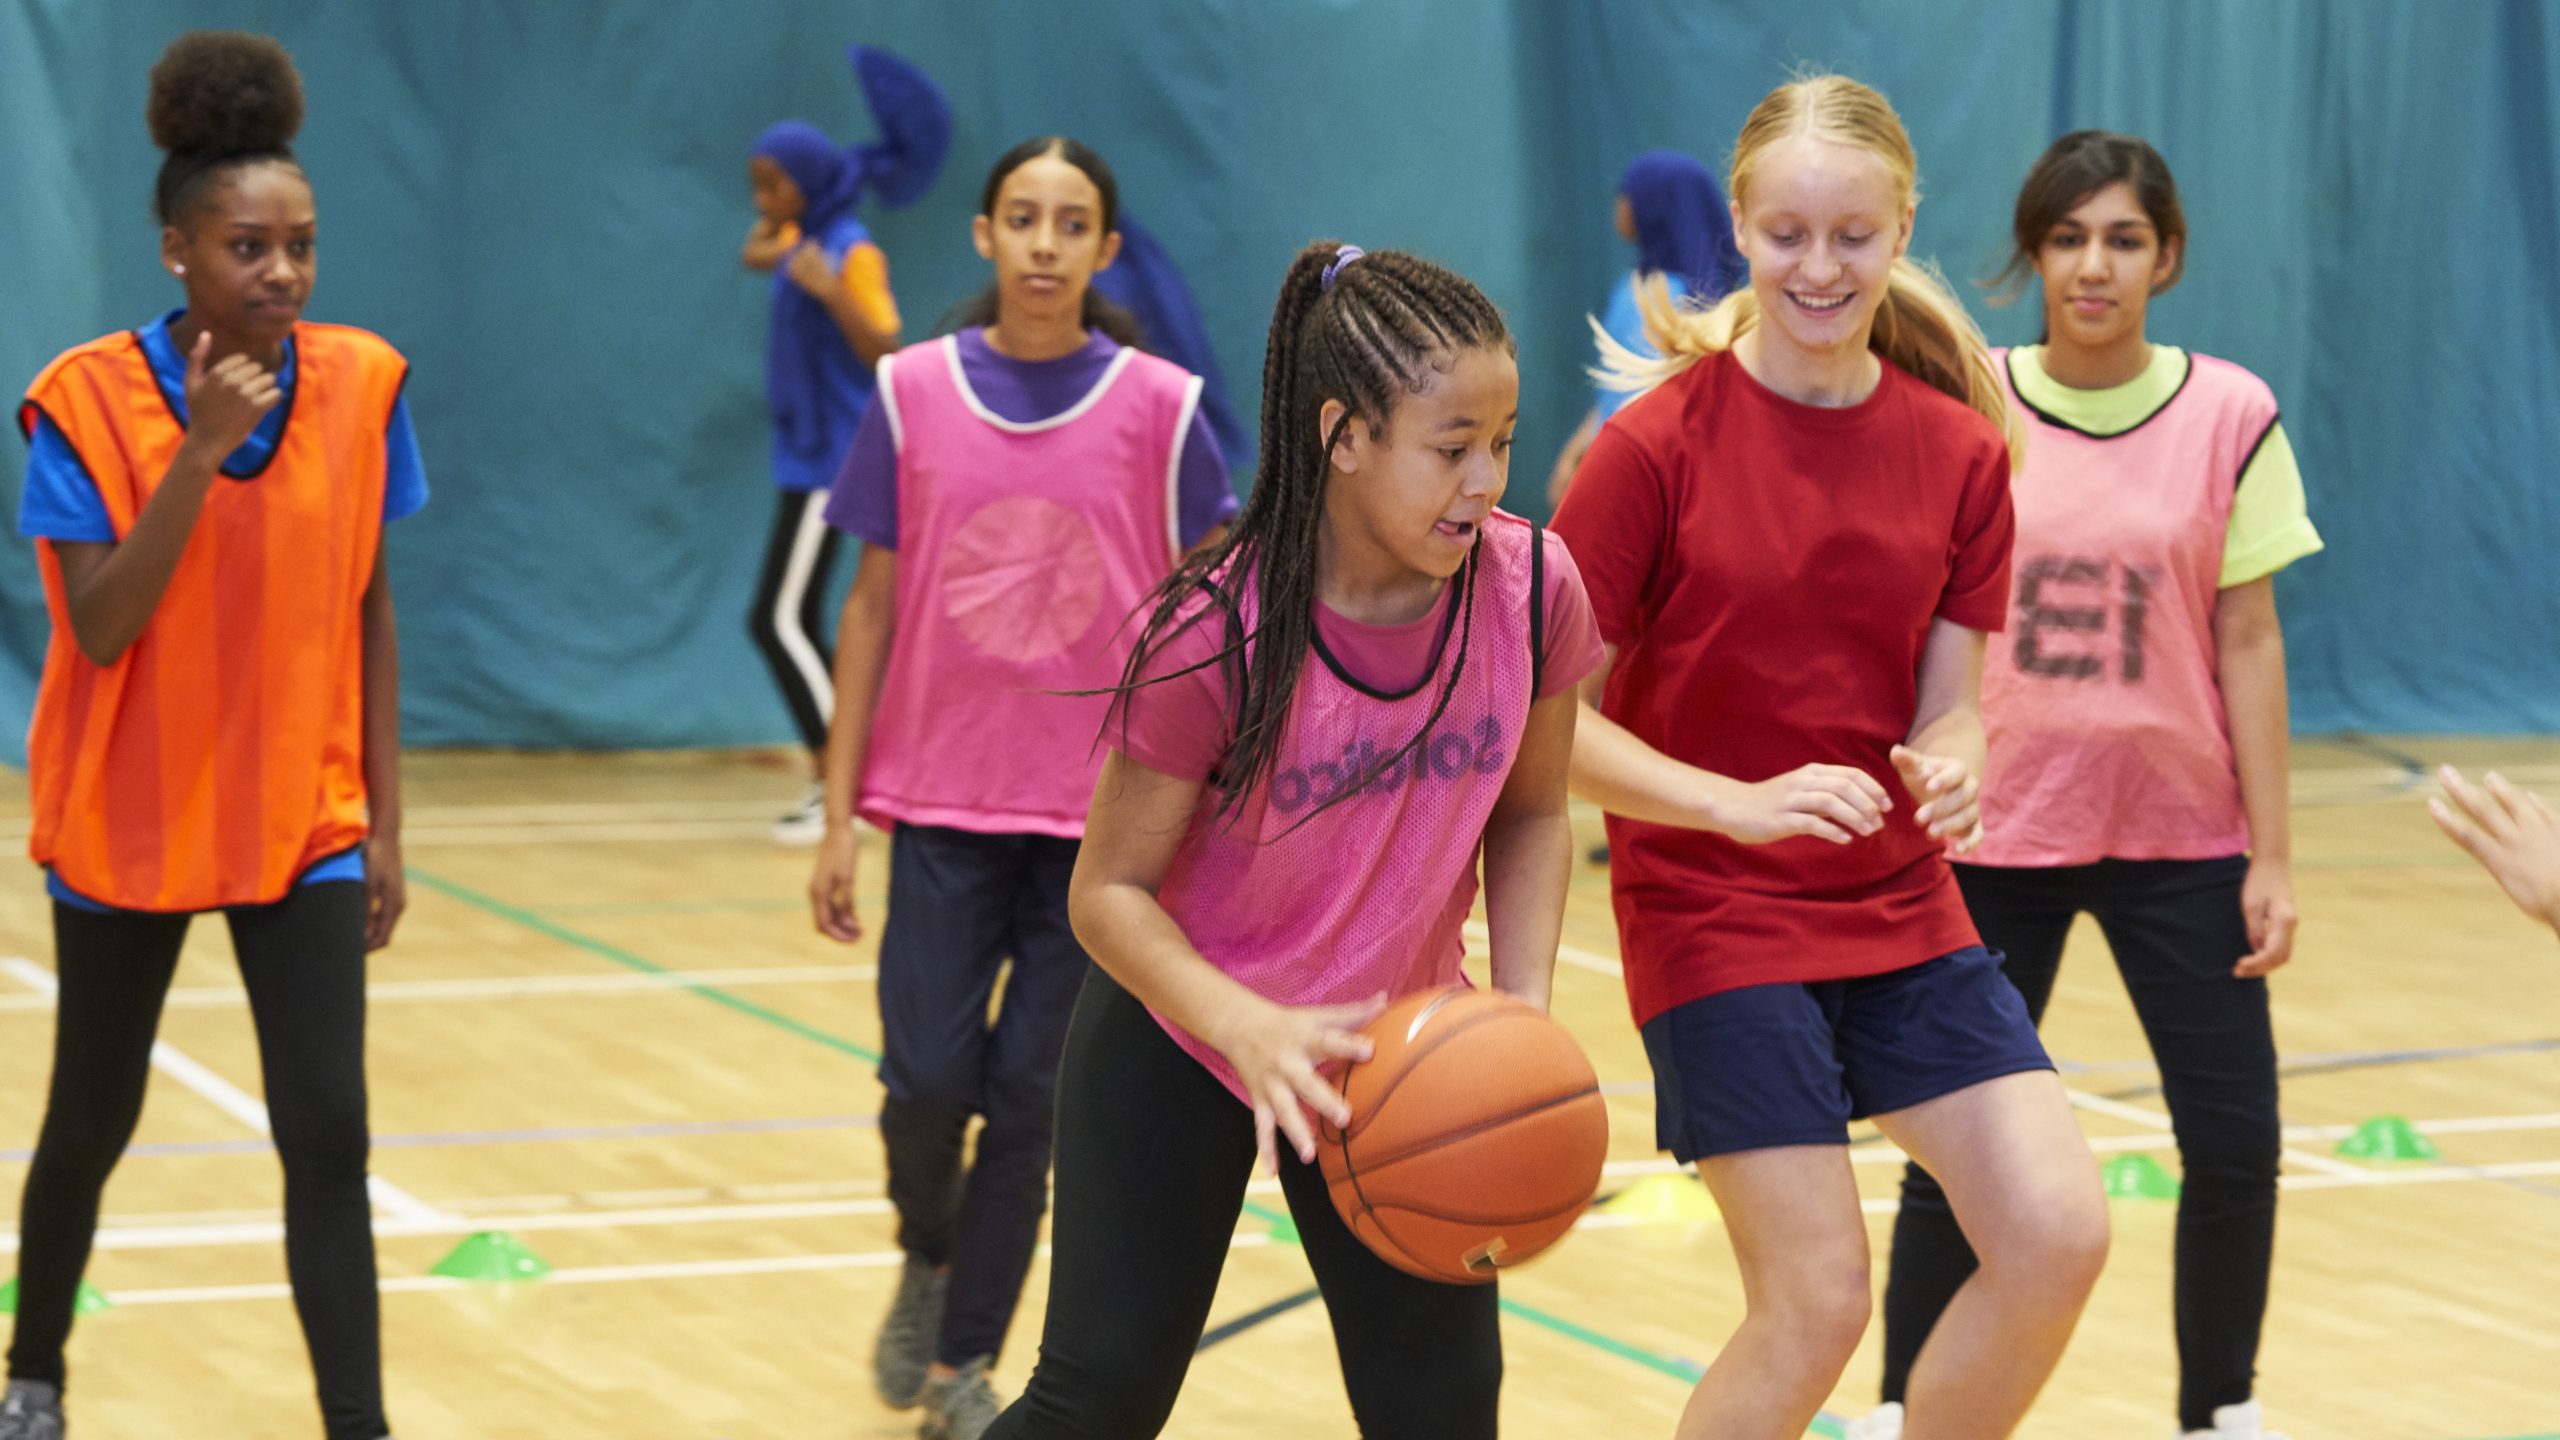 Teenage girls playing basketball. The girl with the ball is mixed raced and wears her hair in braids